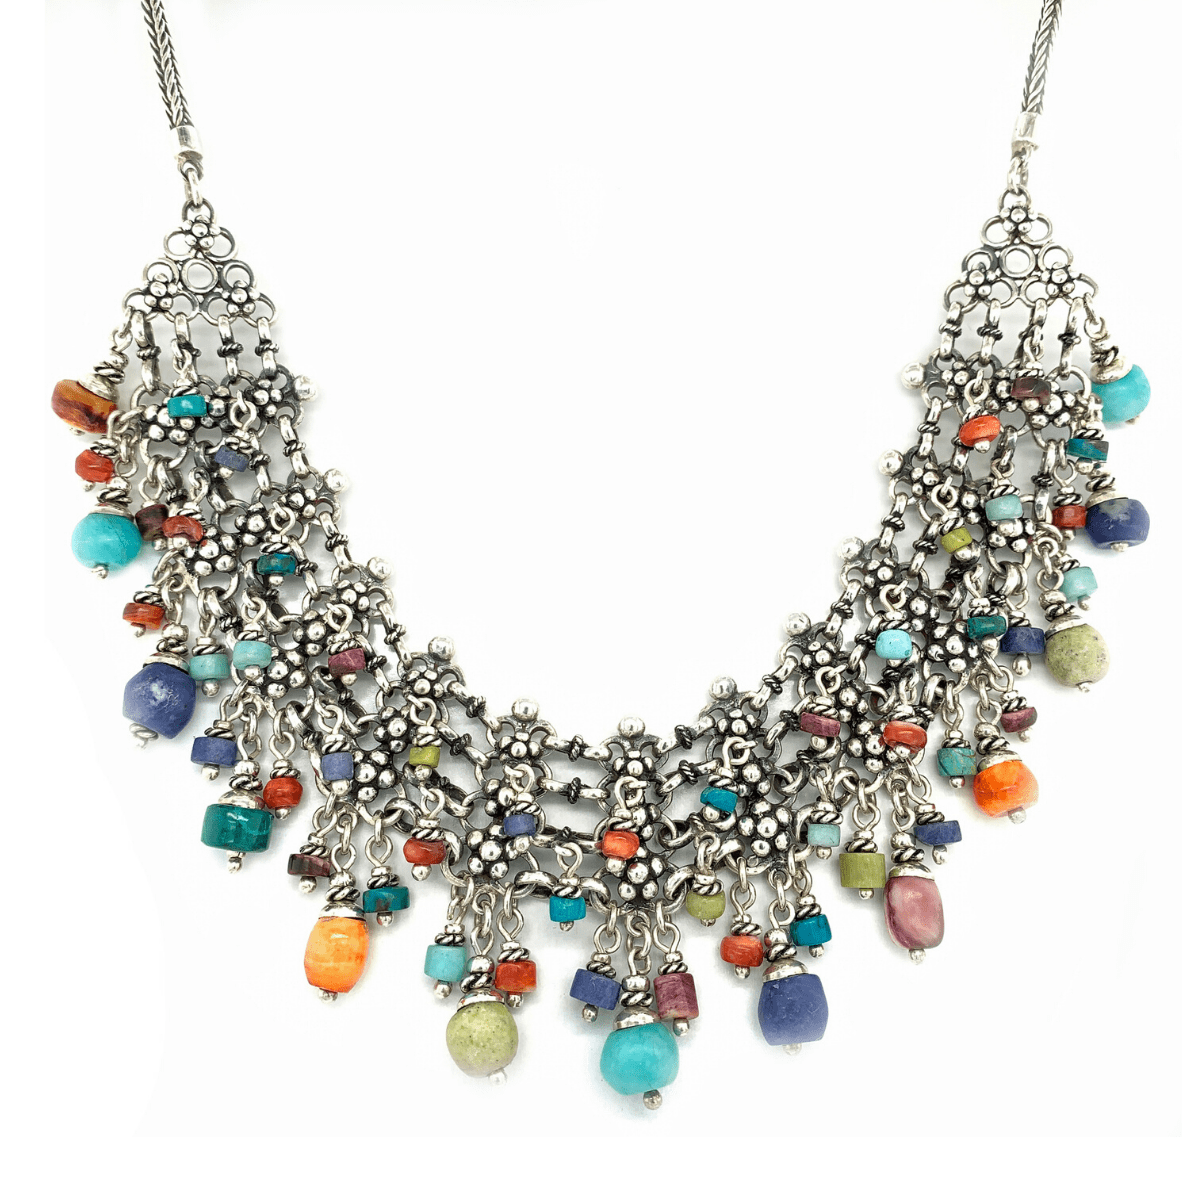 Multi-Colored Beads Cascade &amp; Burnished Sterling Silver Necklace - Qinti - The Peruvian Shop